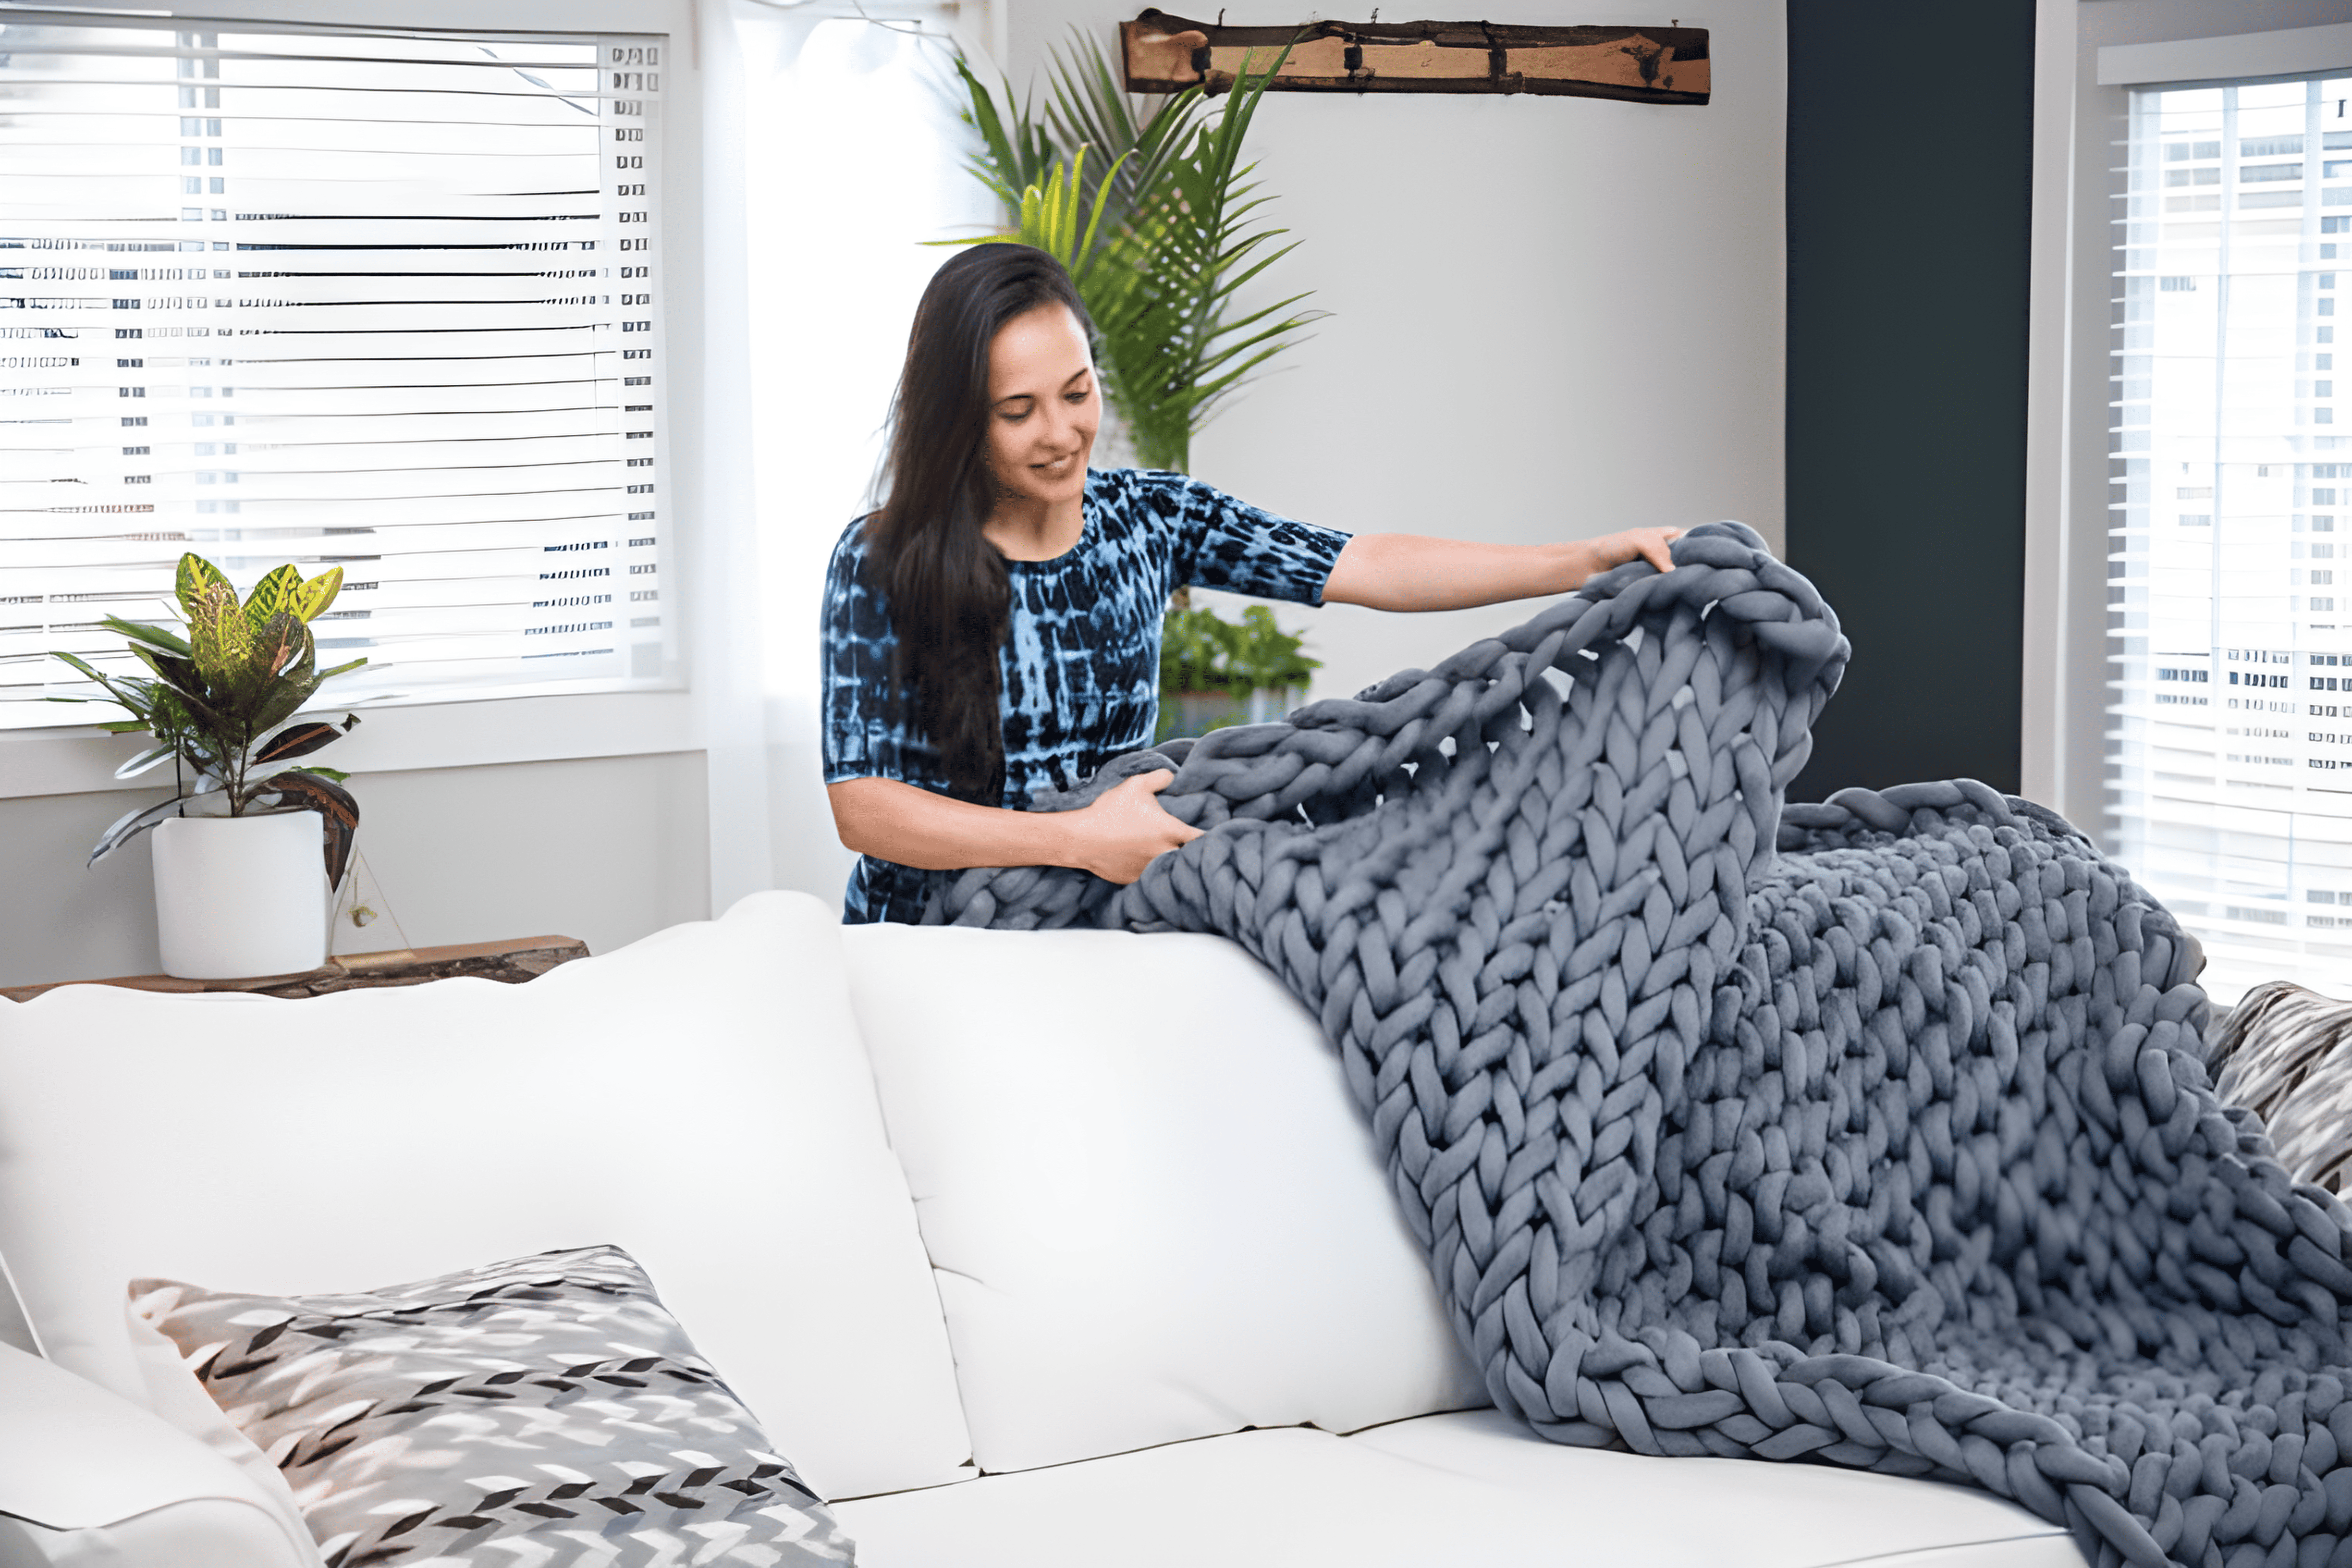 How to Wash a Weighted Blanket According to Experts Tidyhere Image of a Woman Placing Knitted Weighted Blanket on White Couch